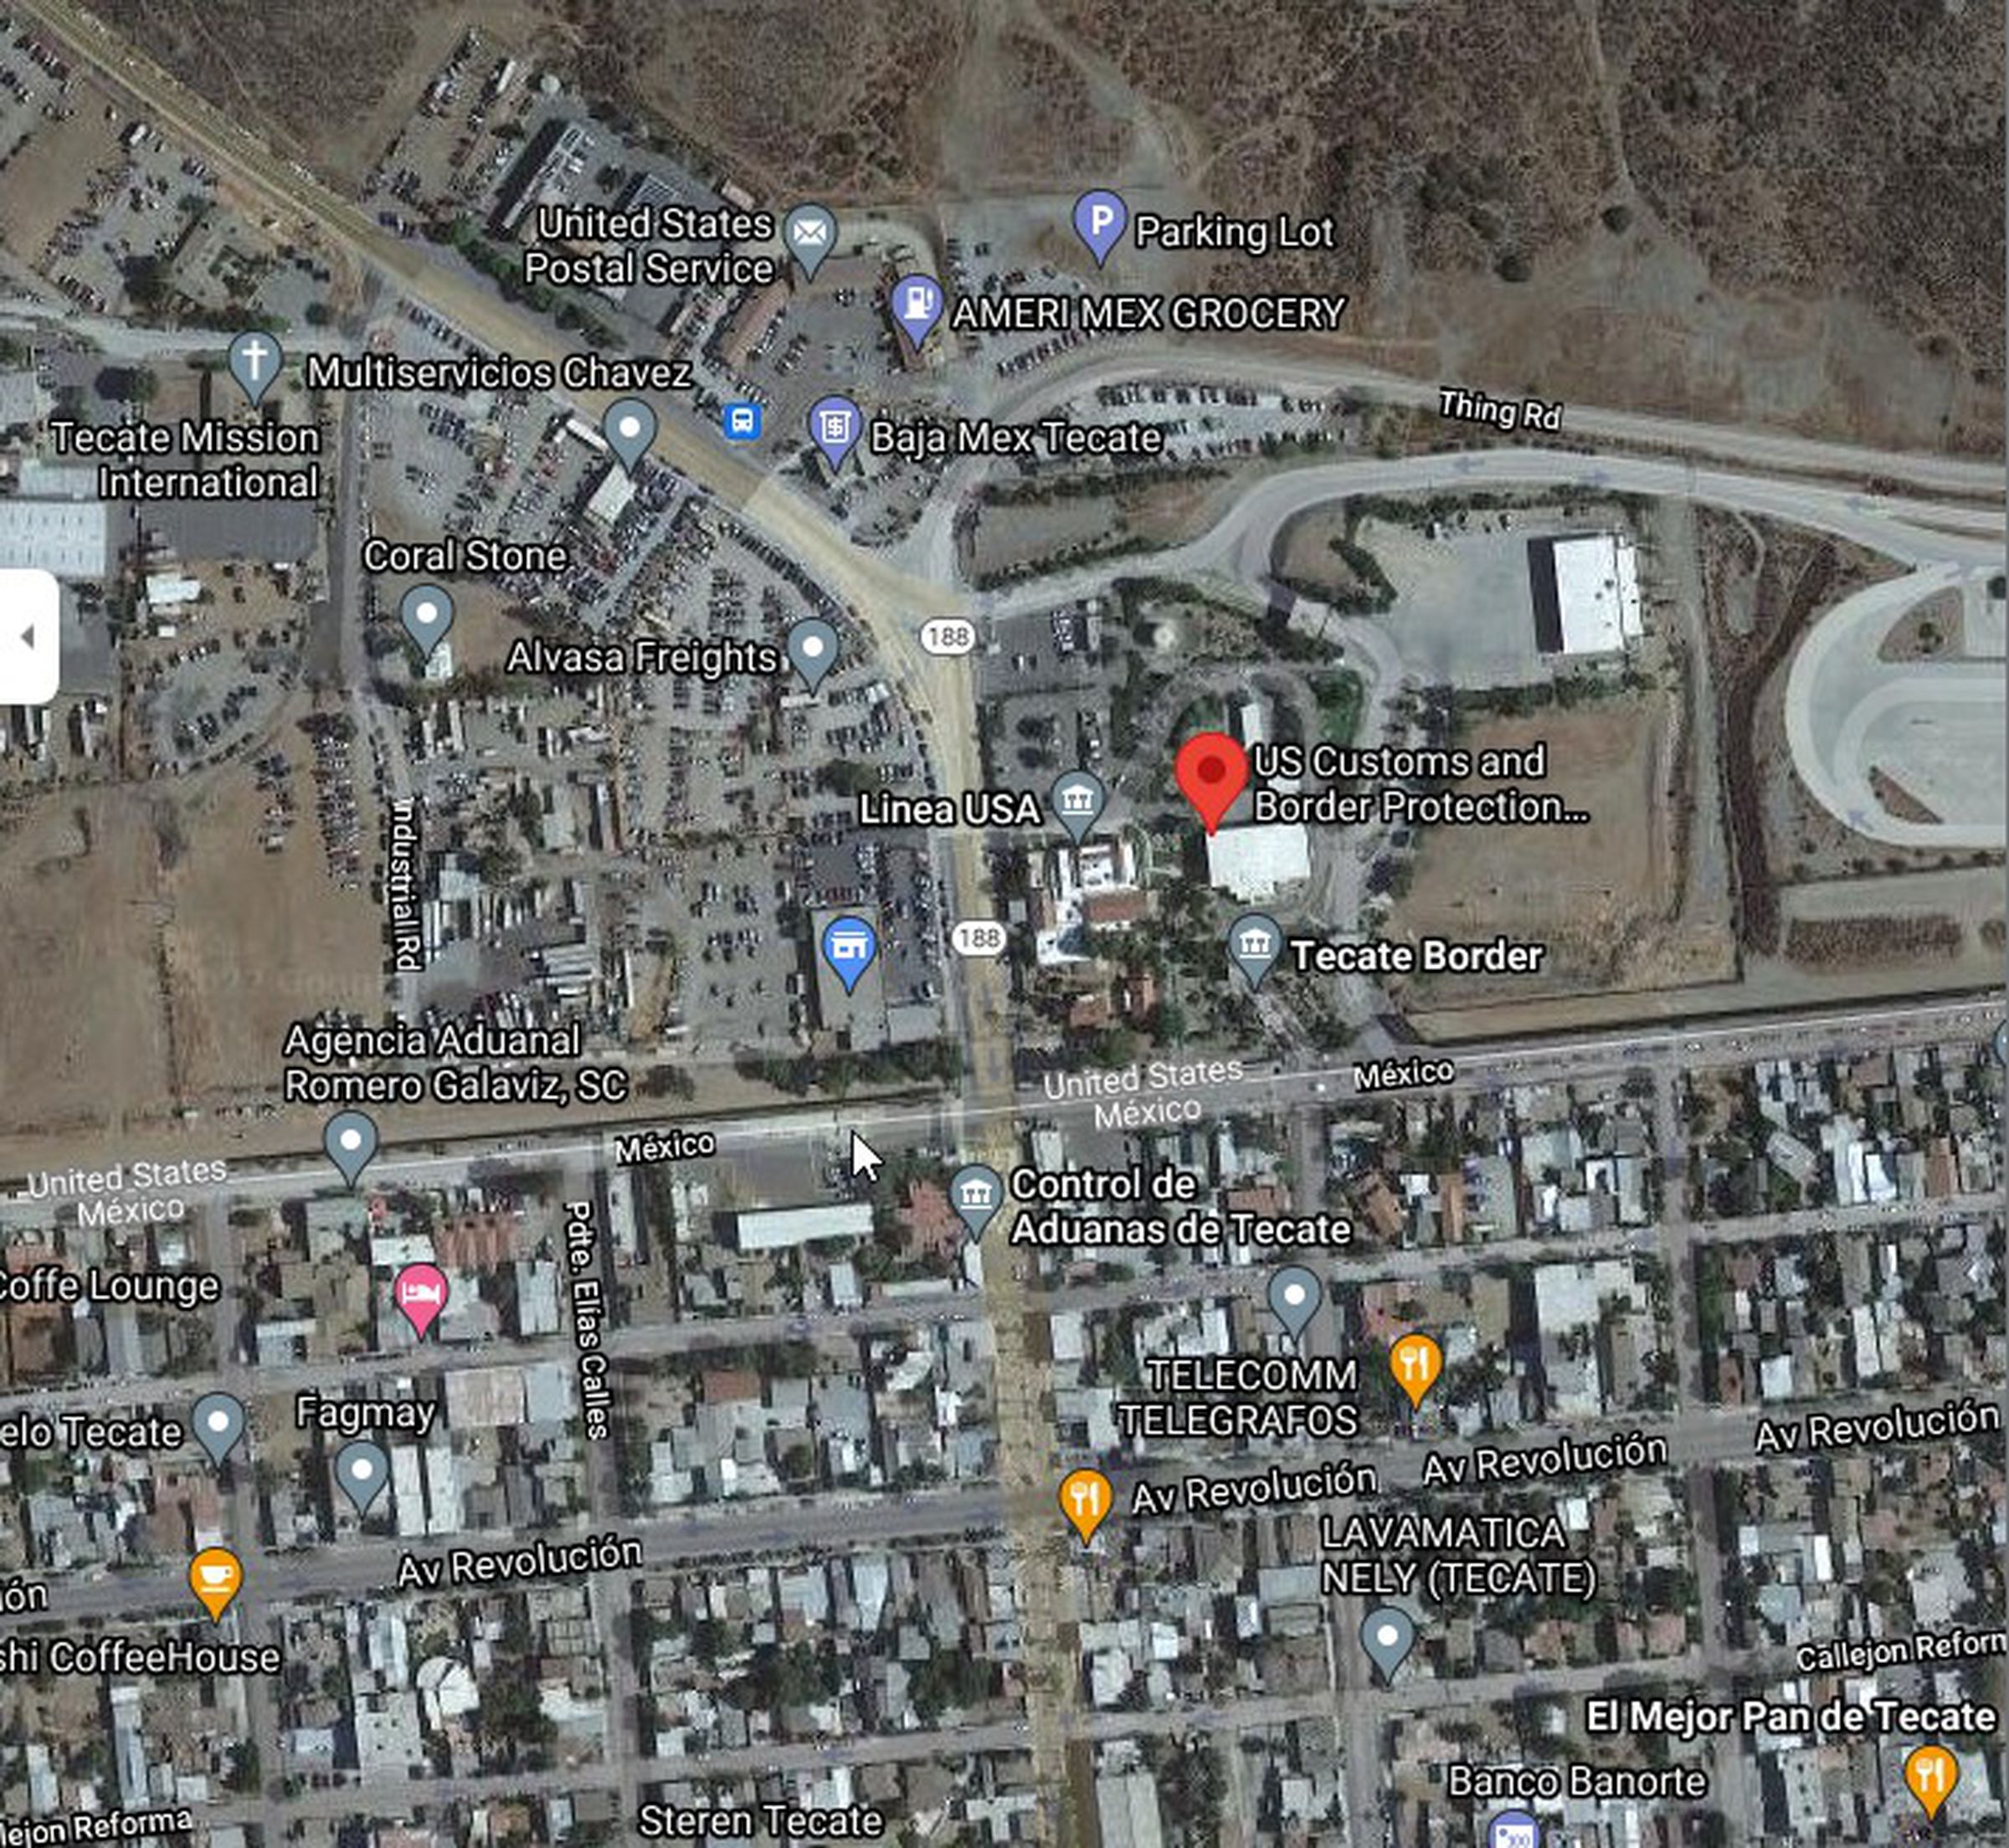 The drone landed in one of the parking lots visible here, just north of the Tecate border.